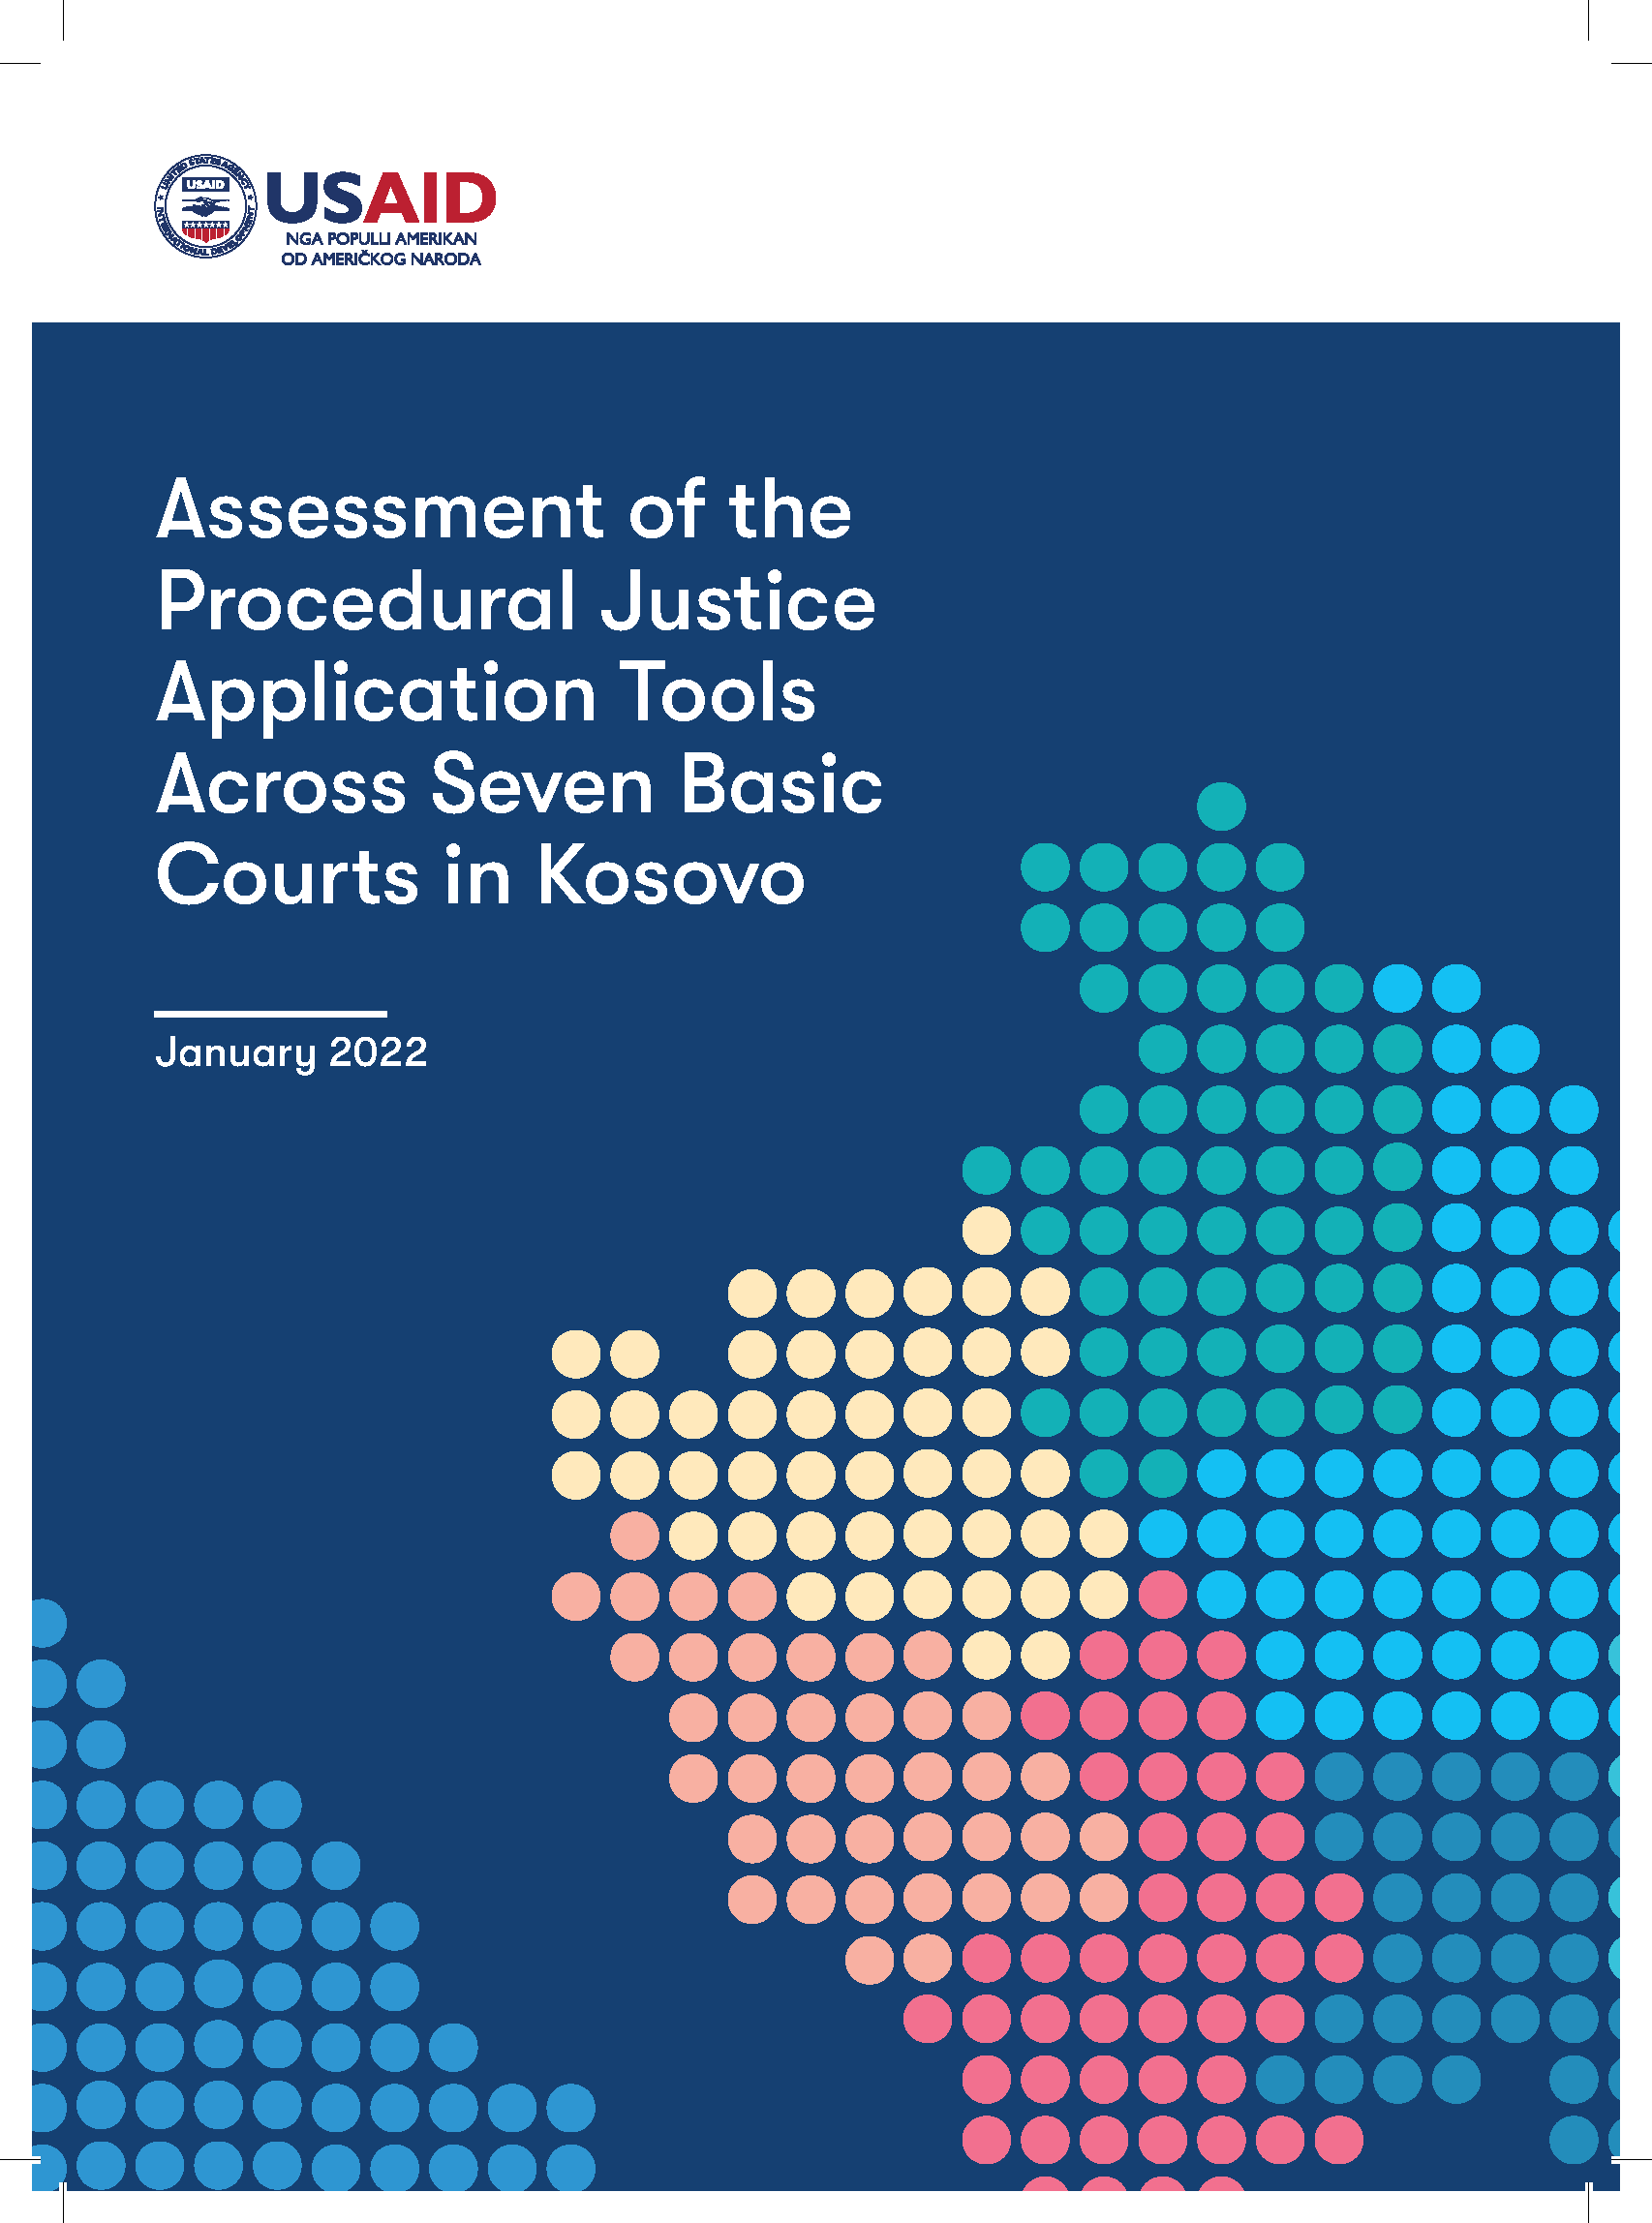 Assessment of the Procedural Justice Application Tools Across Seven Basic Courts in Kosovo